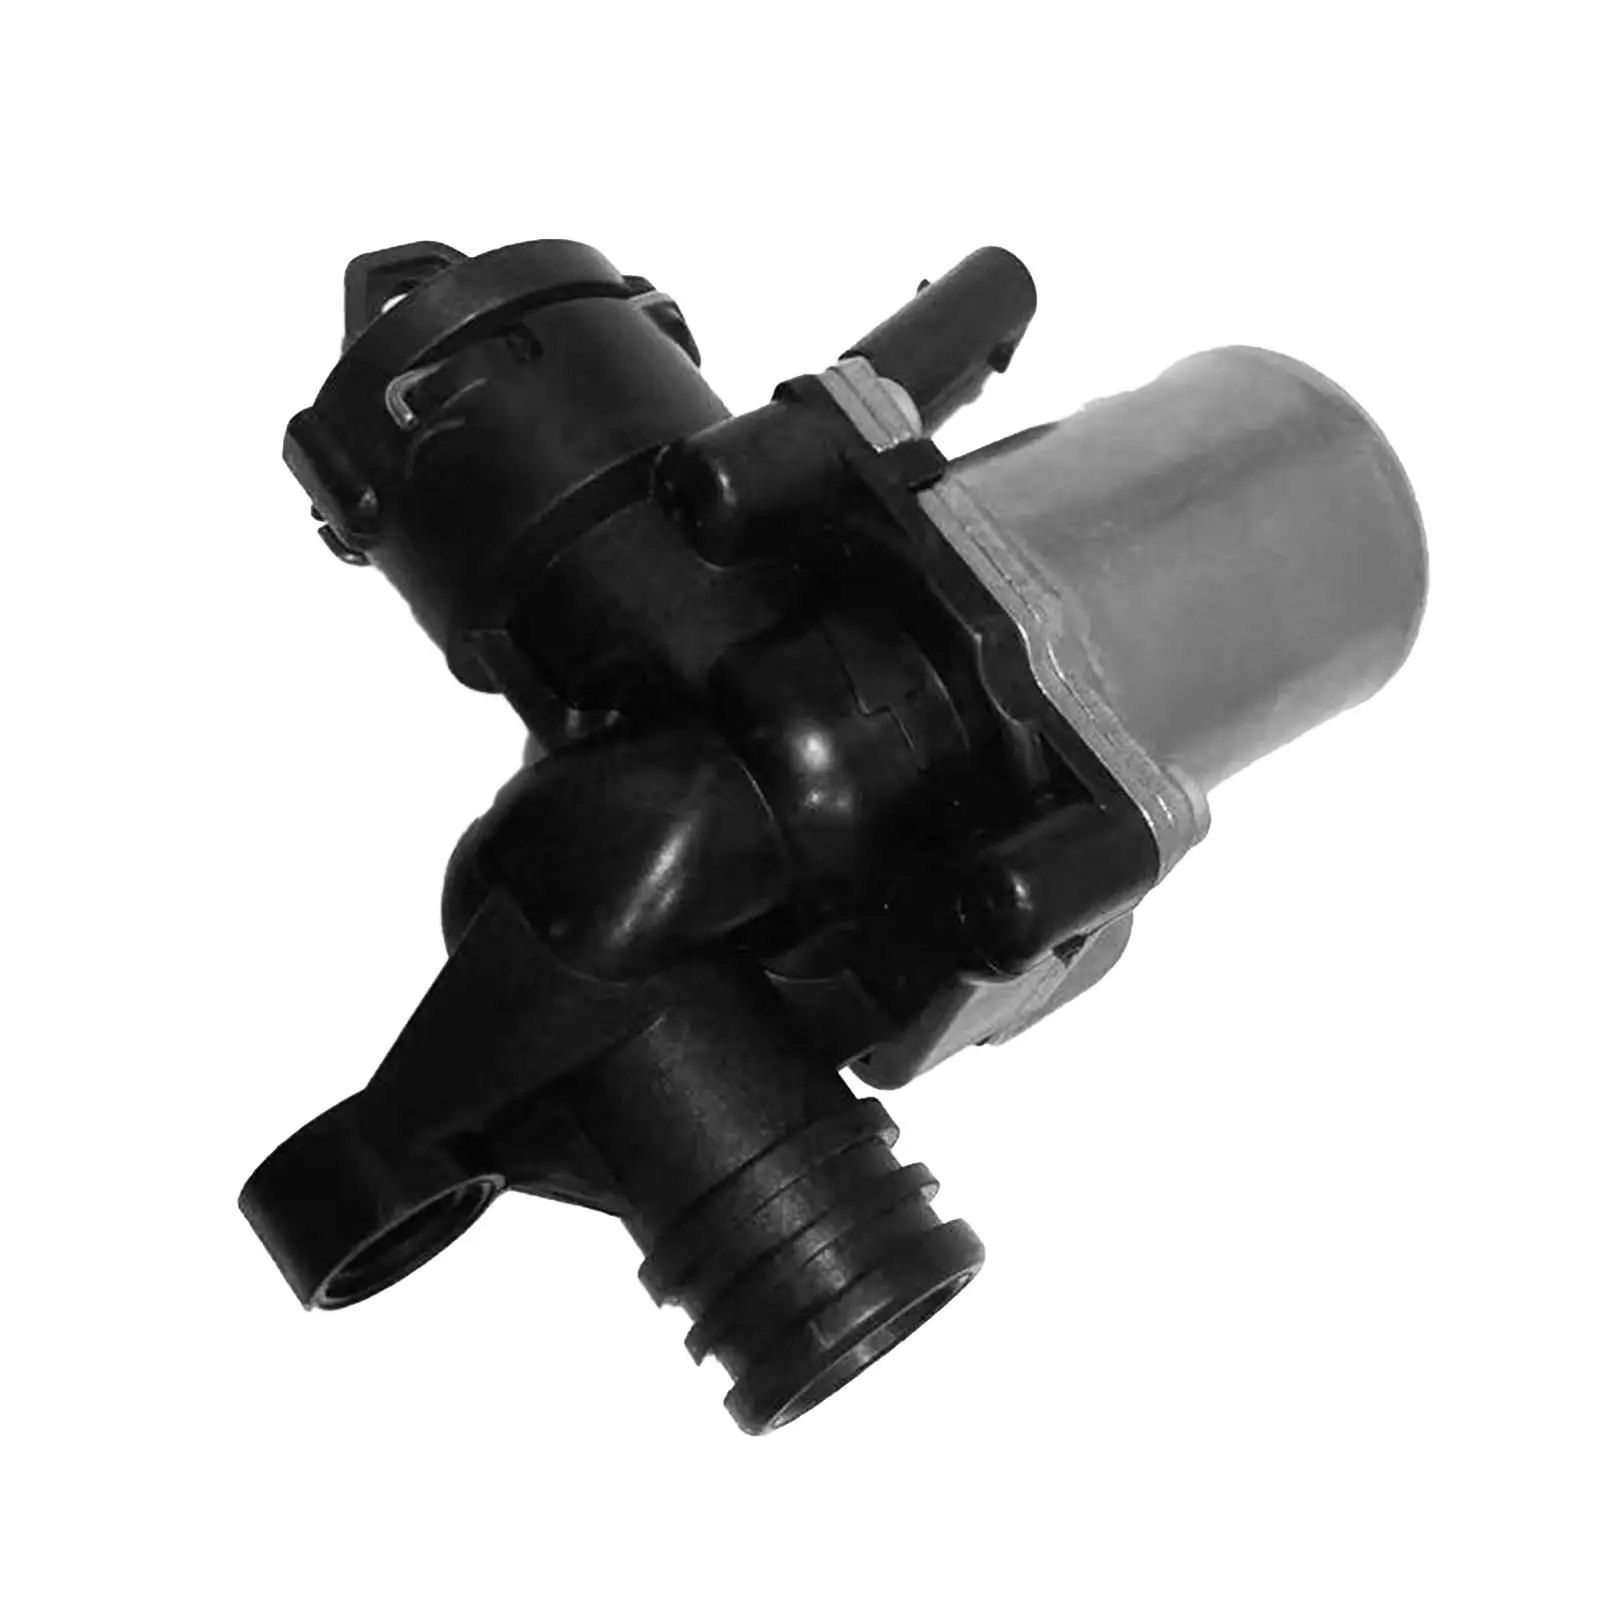  Heater Control Valve 2722000031 Accessories Replace Water Valve